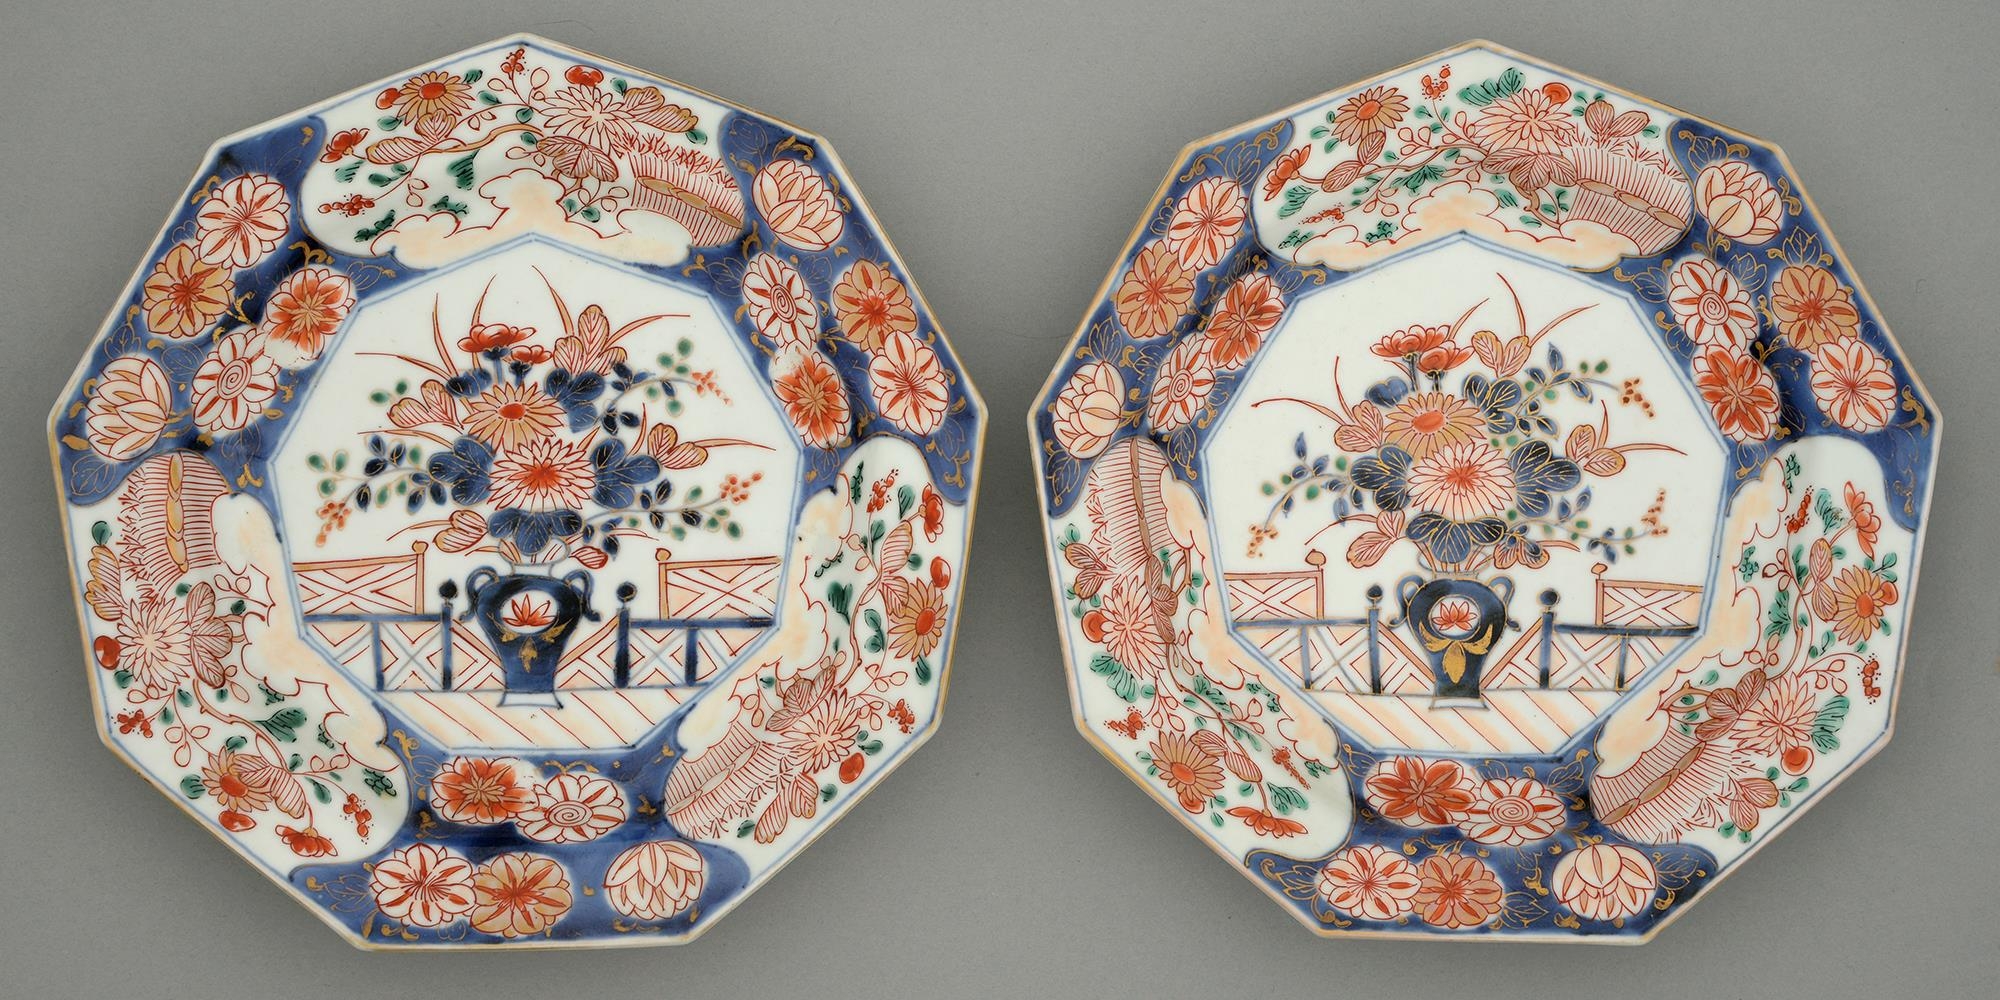 A pair of Imari nonagonal dishes, Edo period, 18th c, painted in underglaze blue and enamelled in